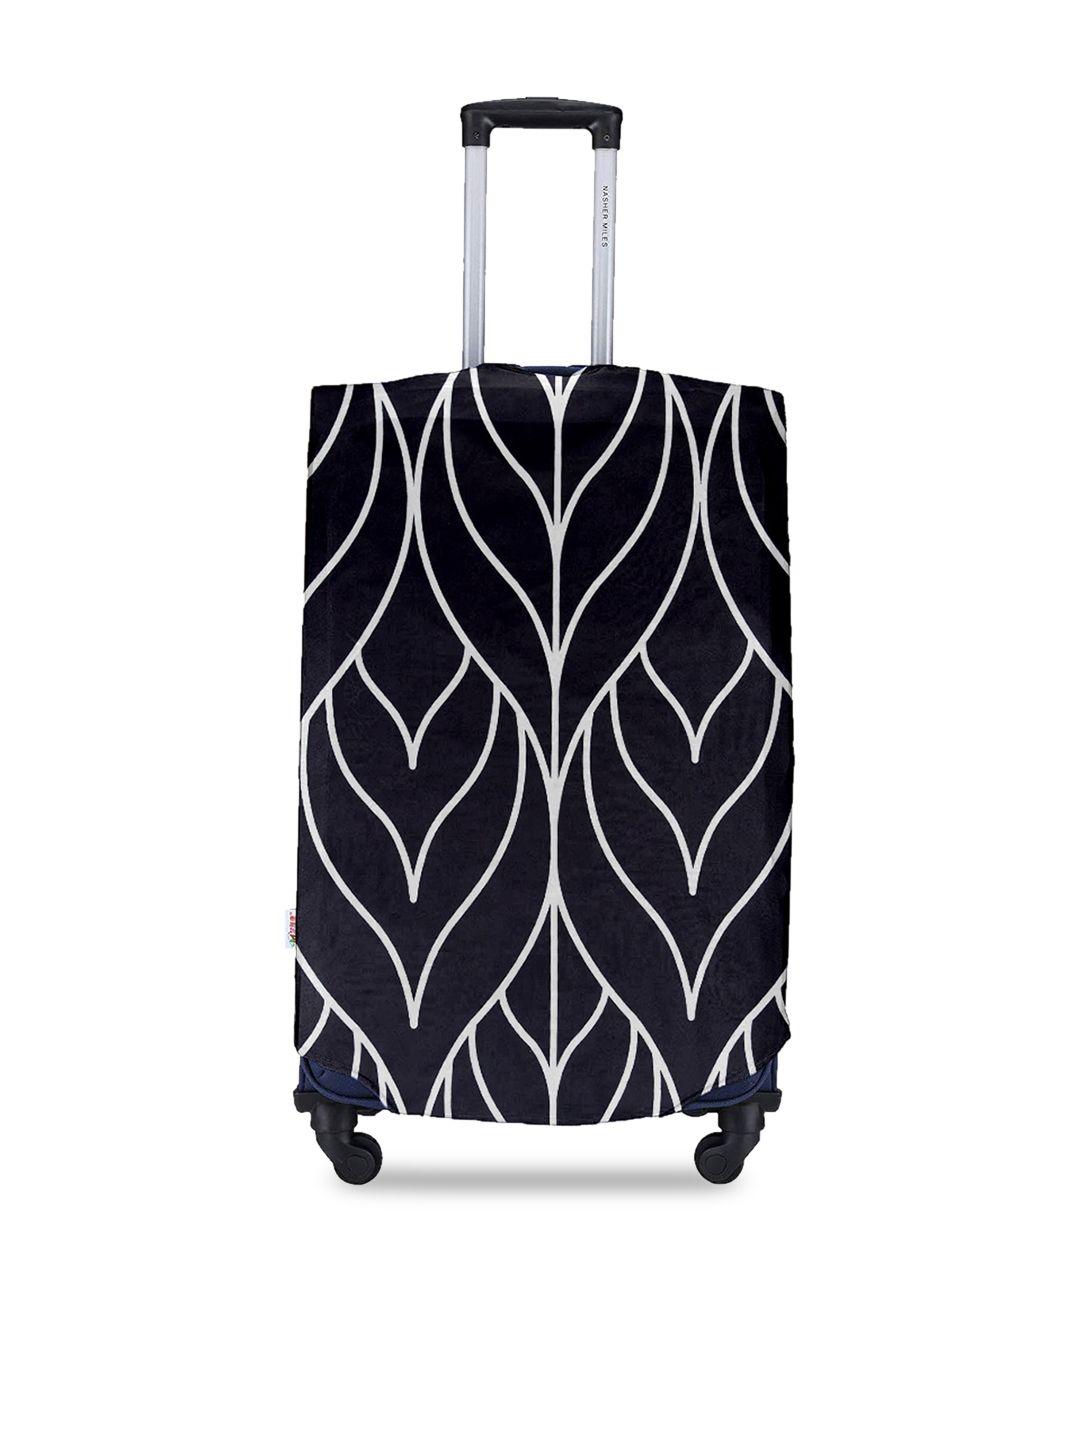 cortina blue & white printed protective large trolley bag cover